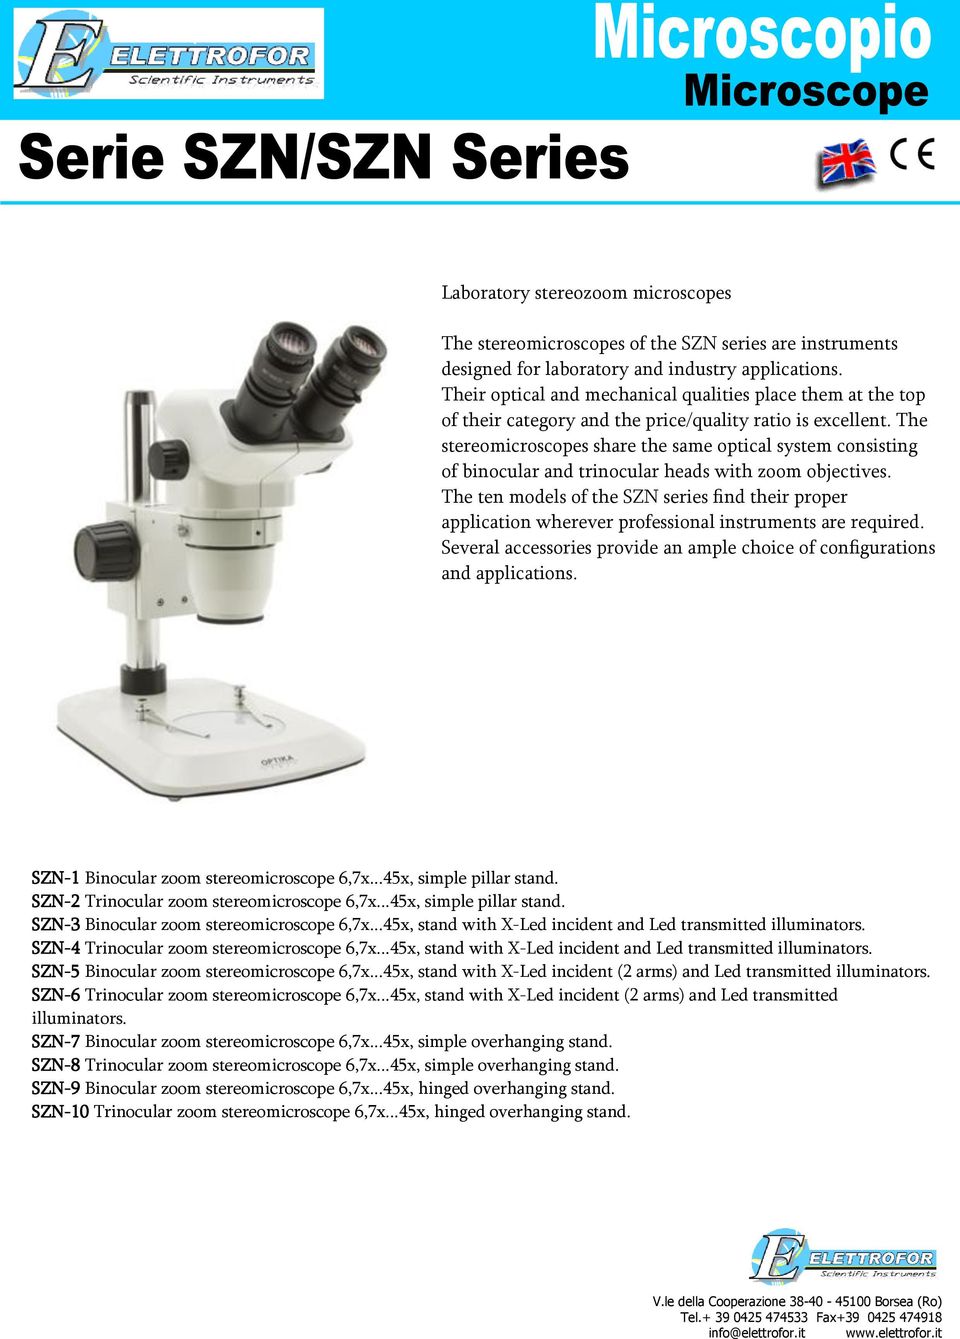 The stereomicroscopes share the same optical system consisting of binocular and trinocular heads with zoom objectives.